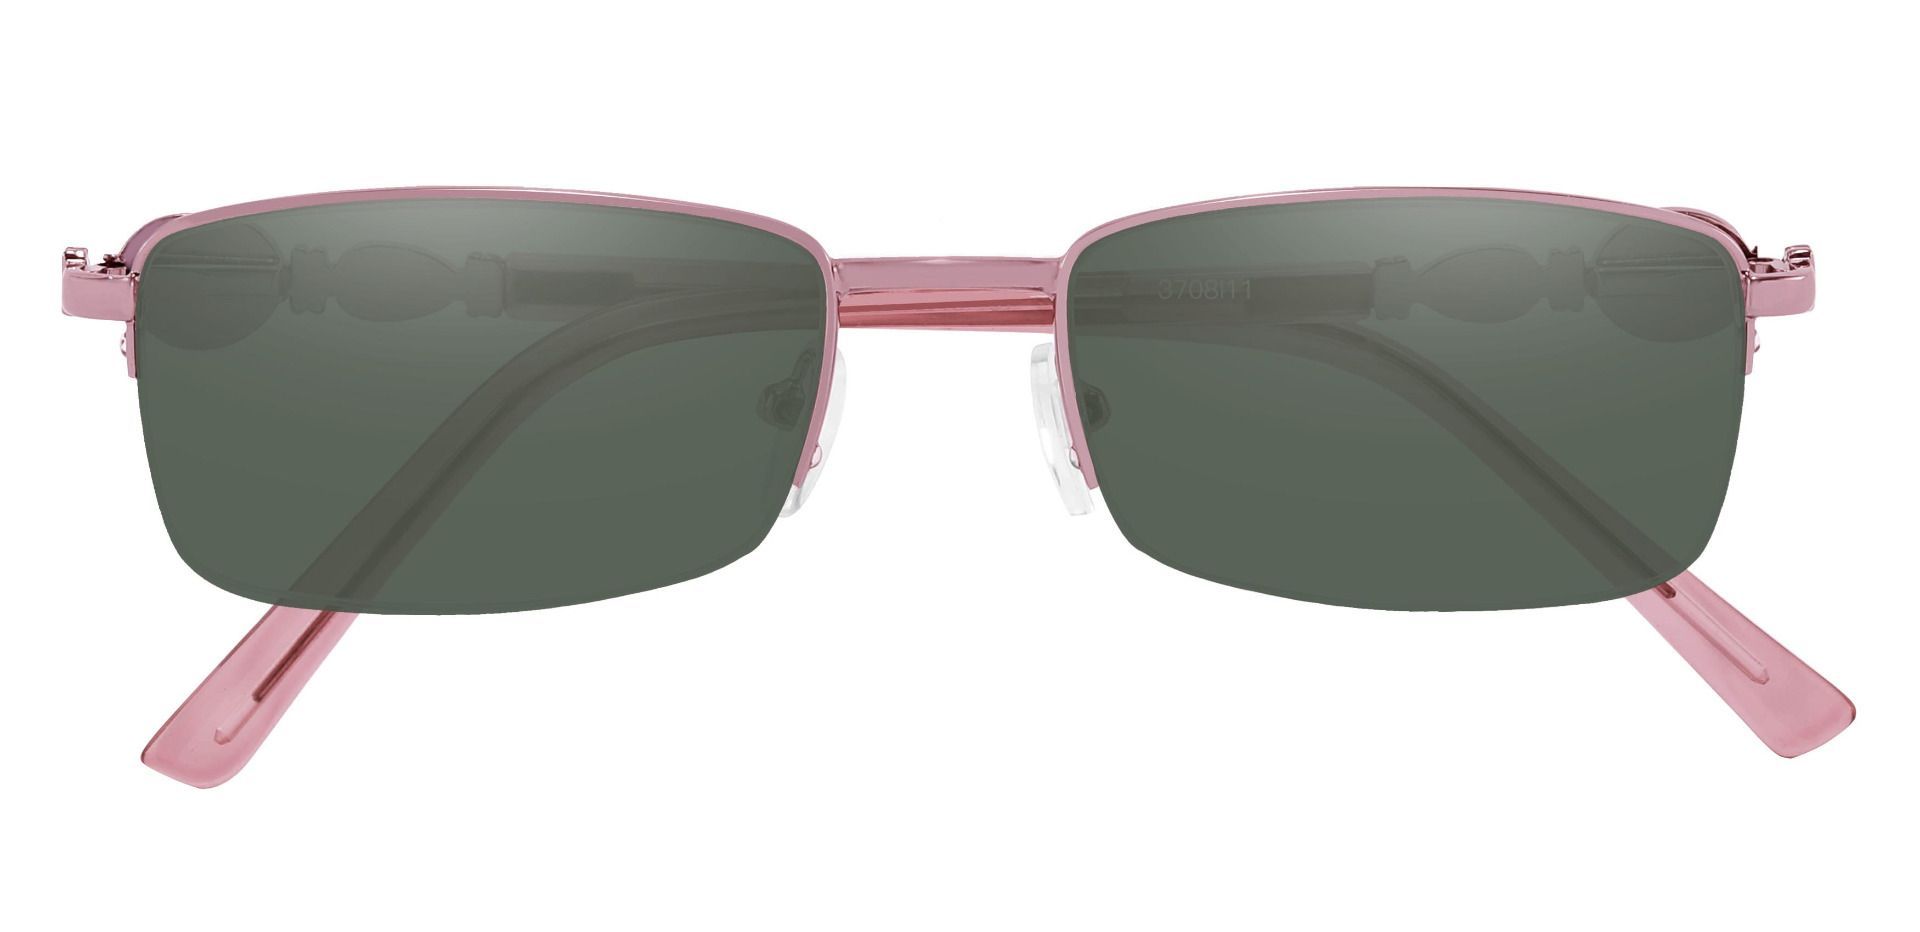 Crowley Rectangle Progressive Sunglasses - Pink Frame With Green Lenses